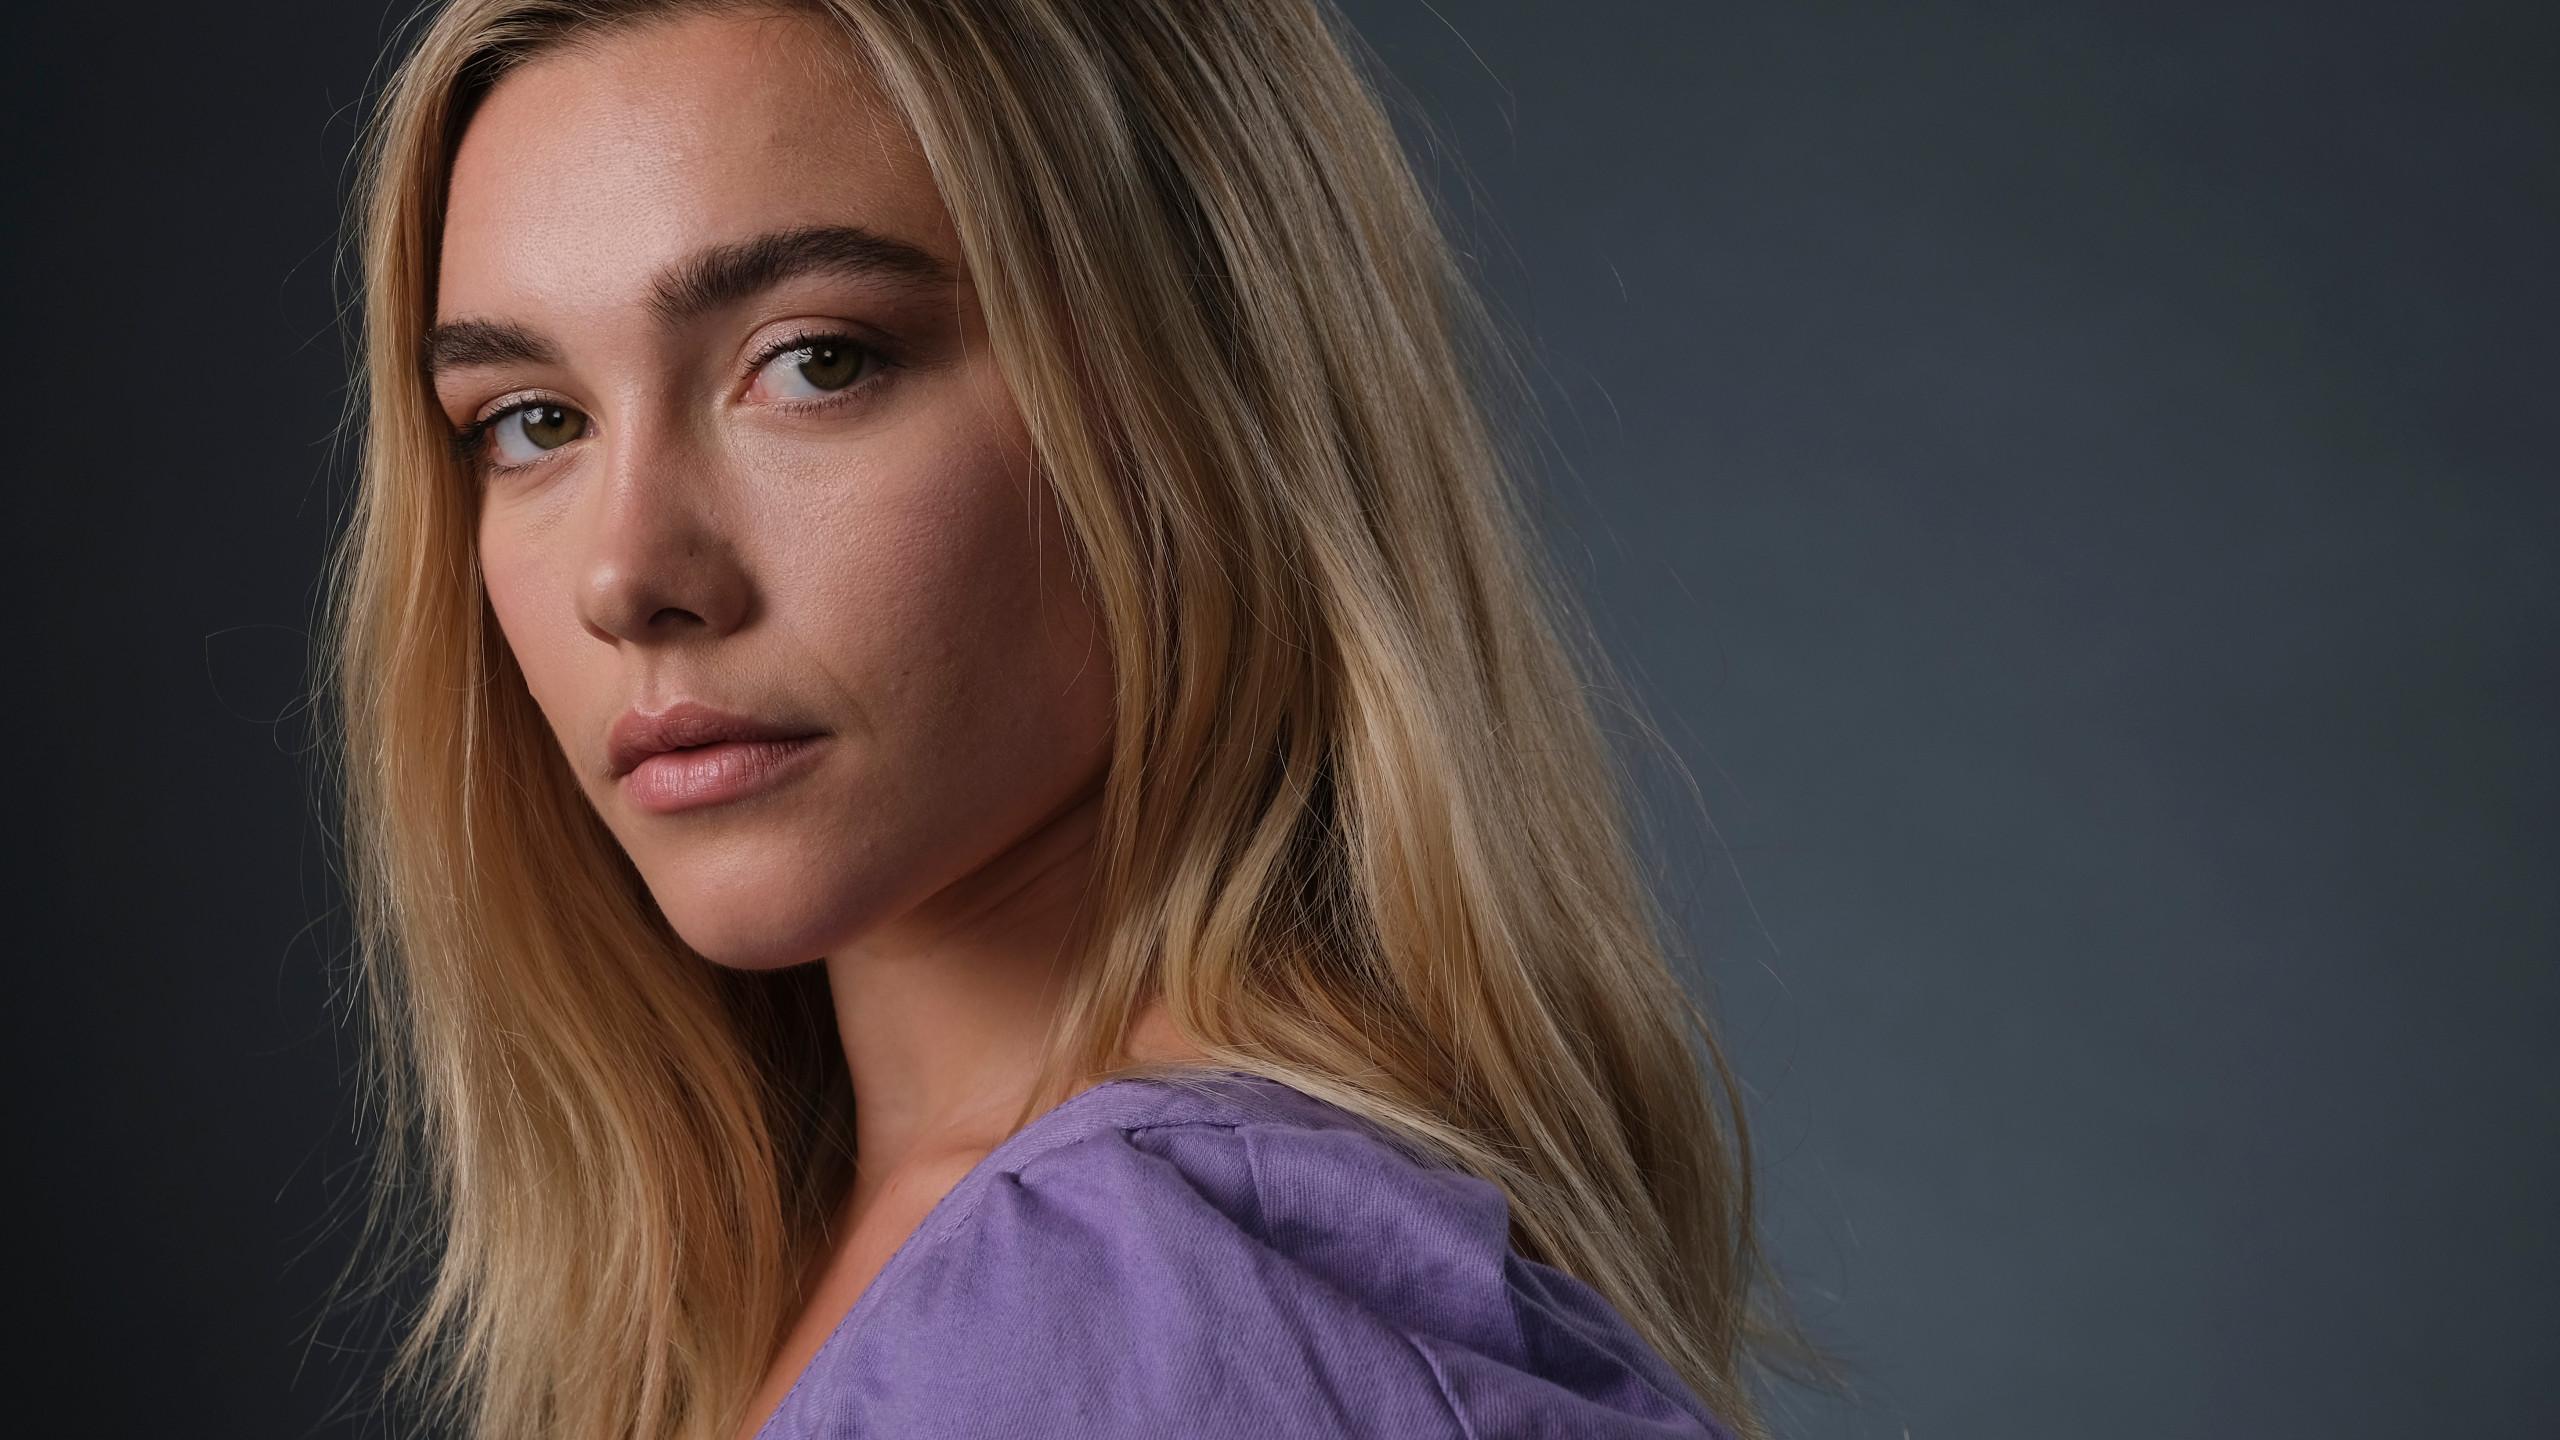 A woman with blonde hair and a purple shirt - Florence Pugh